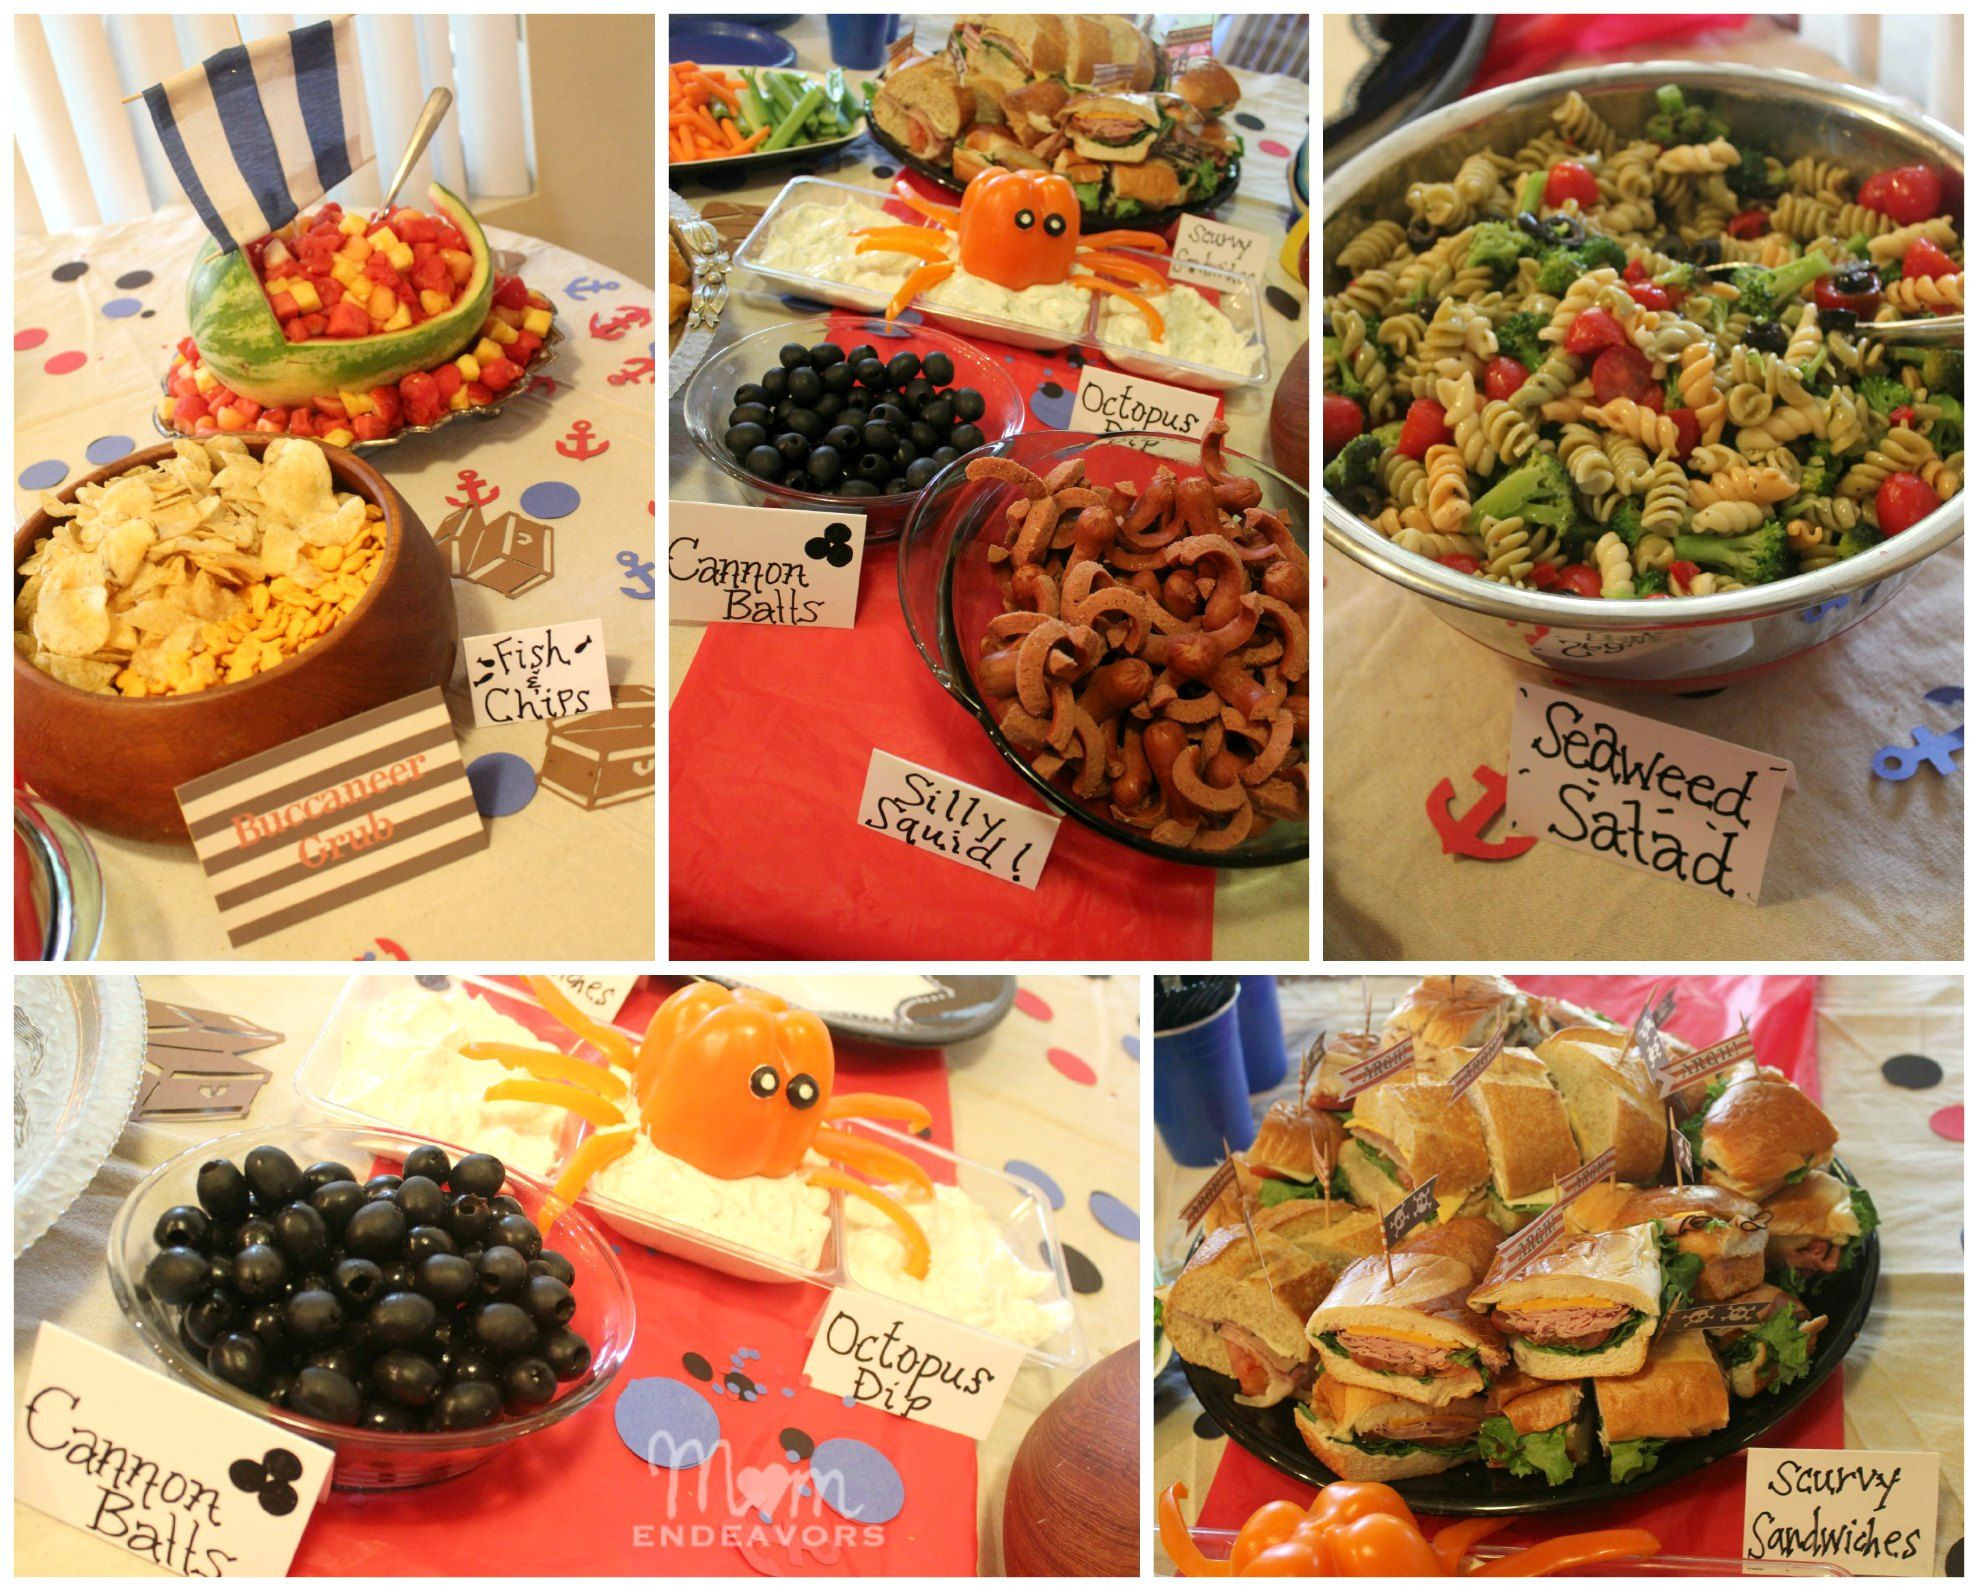 Jake And The Neverland Pirates Birthday Party Food Ideas
 Pirate Birthday Party Treats